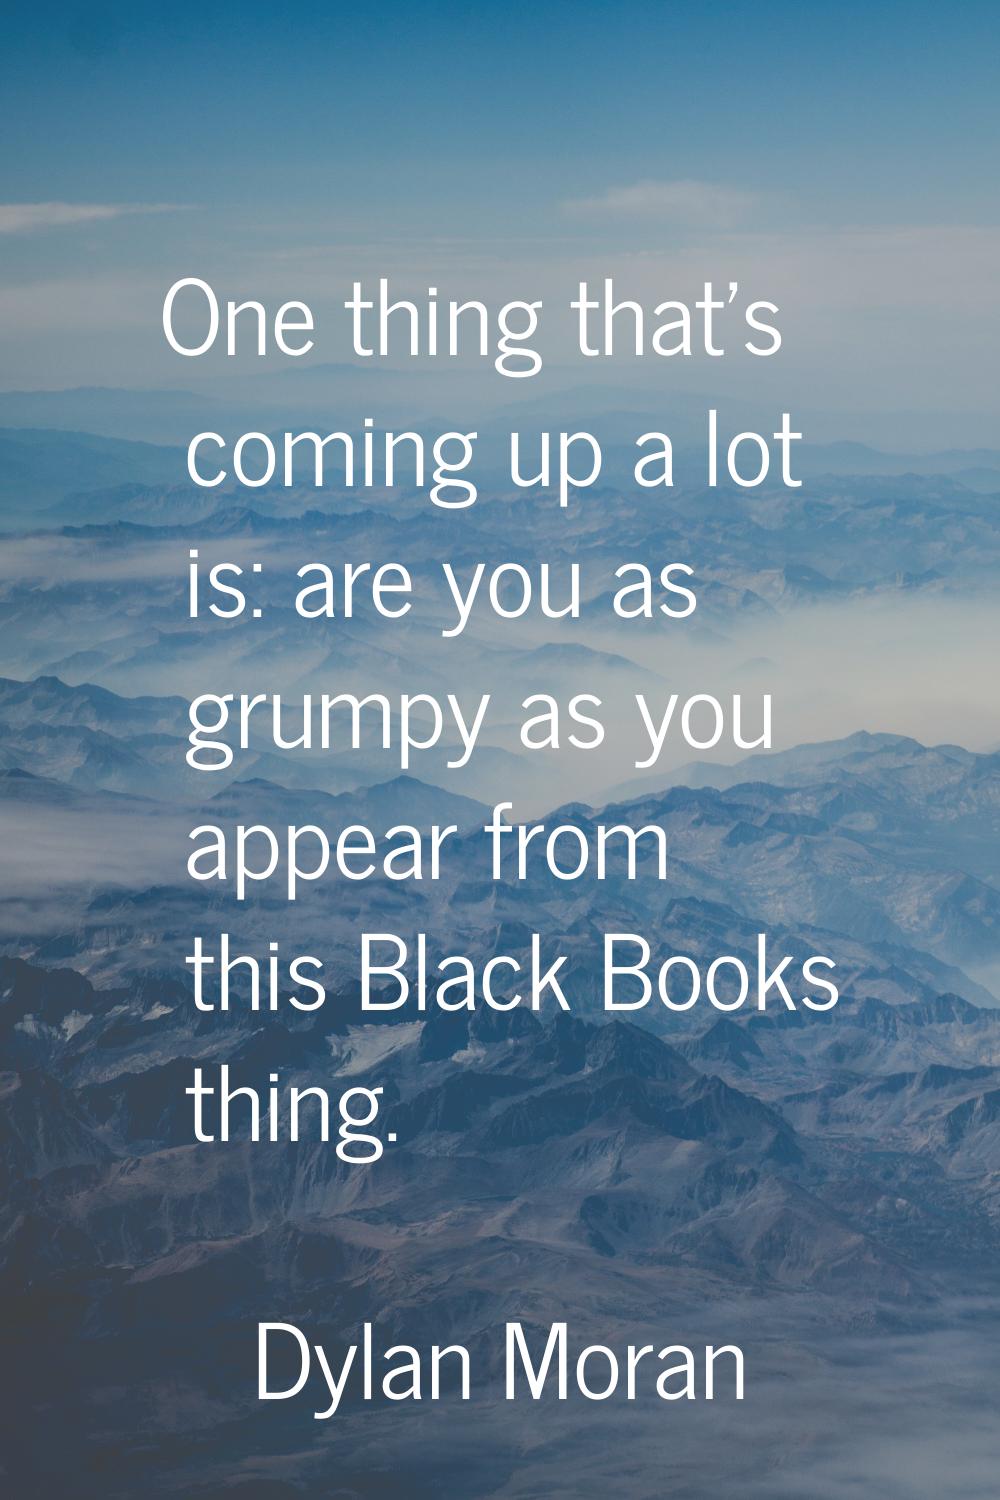 One thing that's coming up a lot is: are you as grumpy as you appear from this Black Books thing.